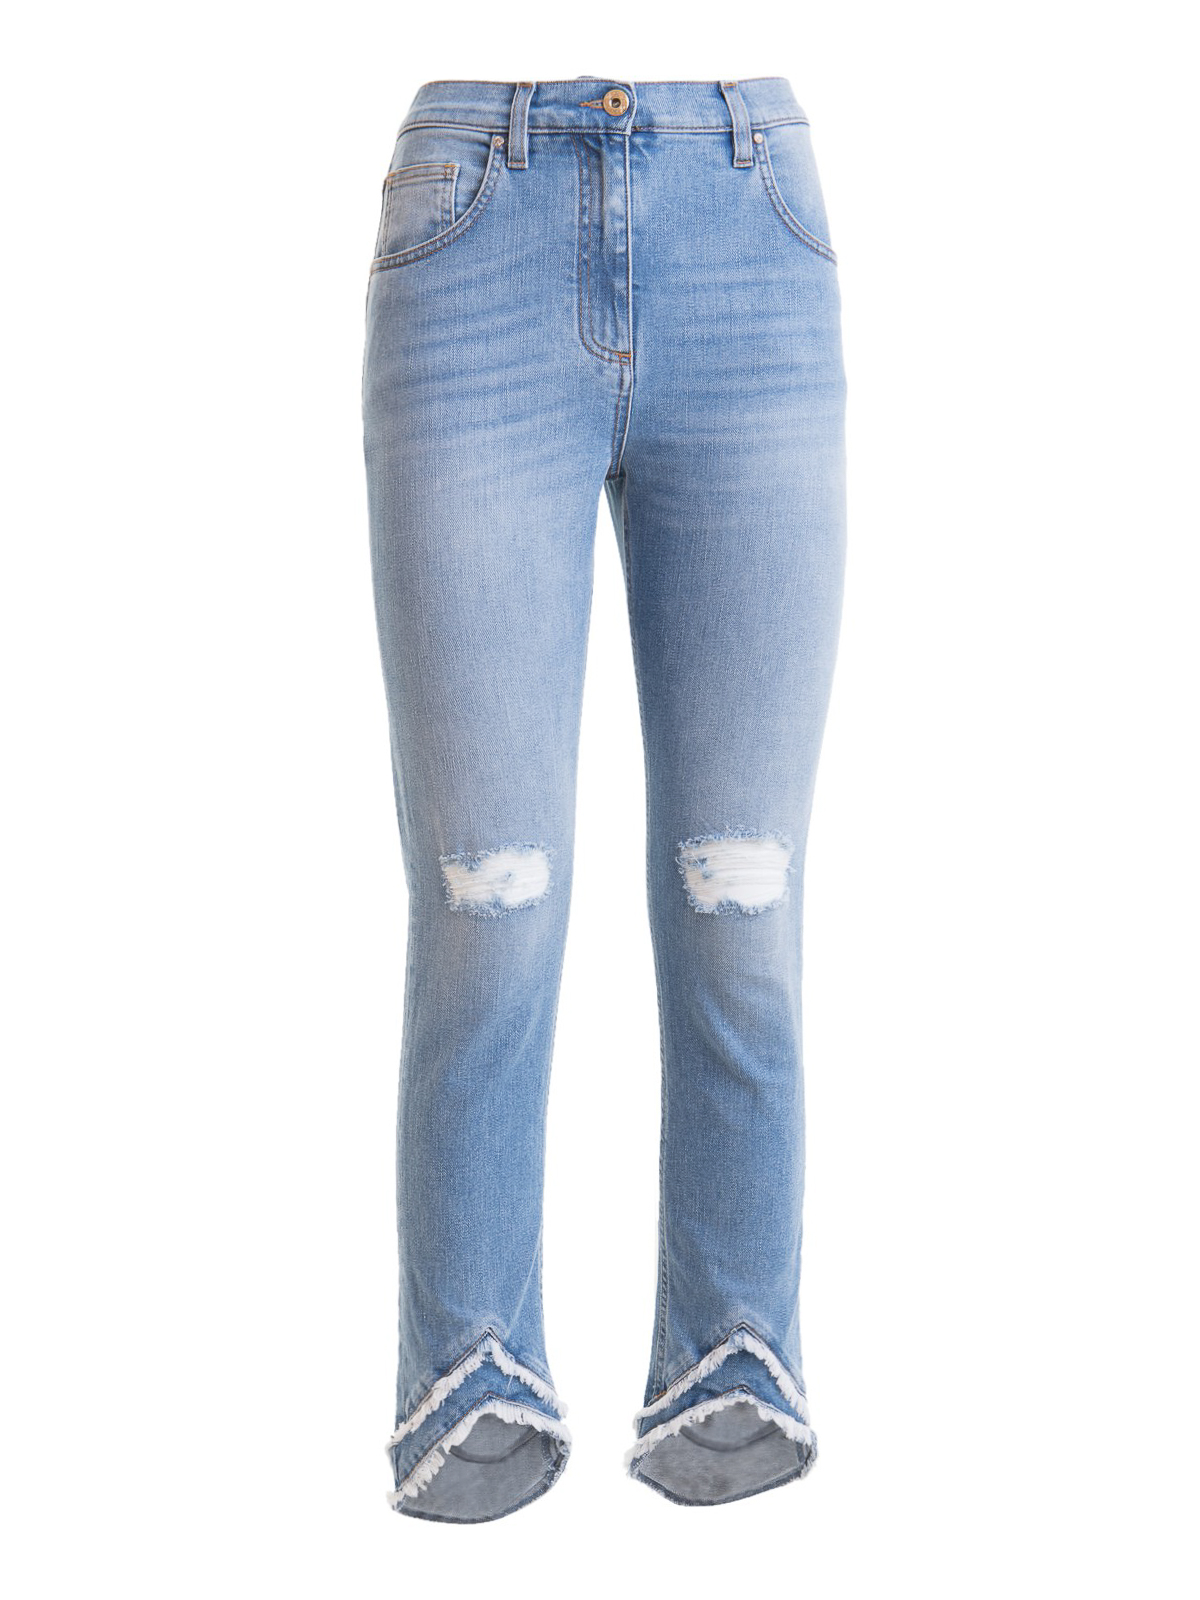 Blumarine Jeans With Rips In Light Wash